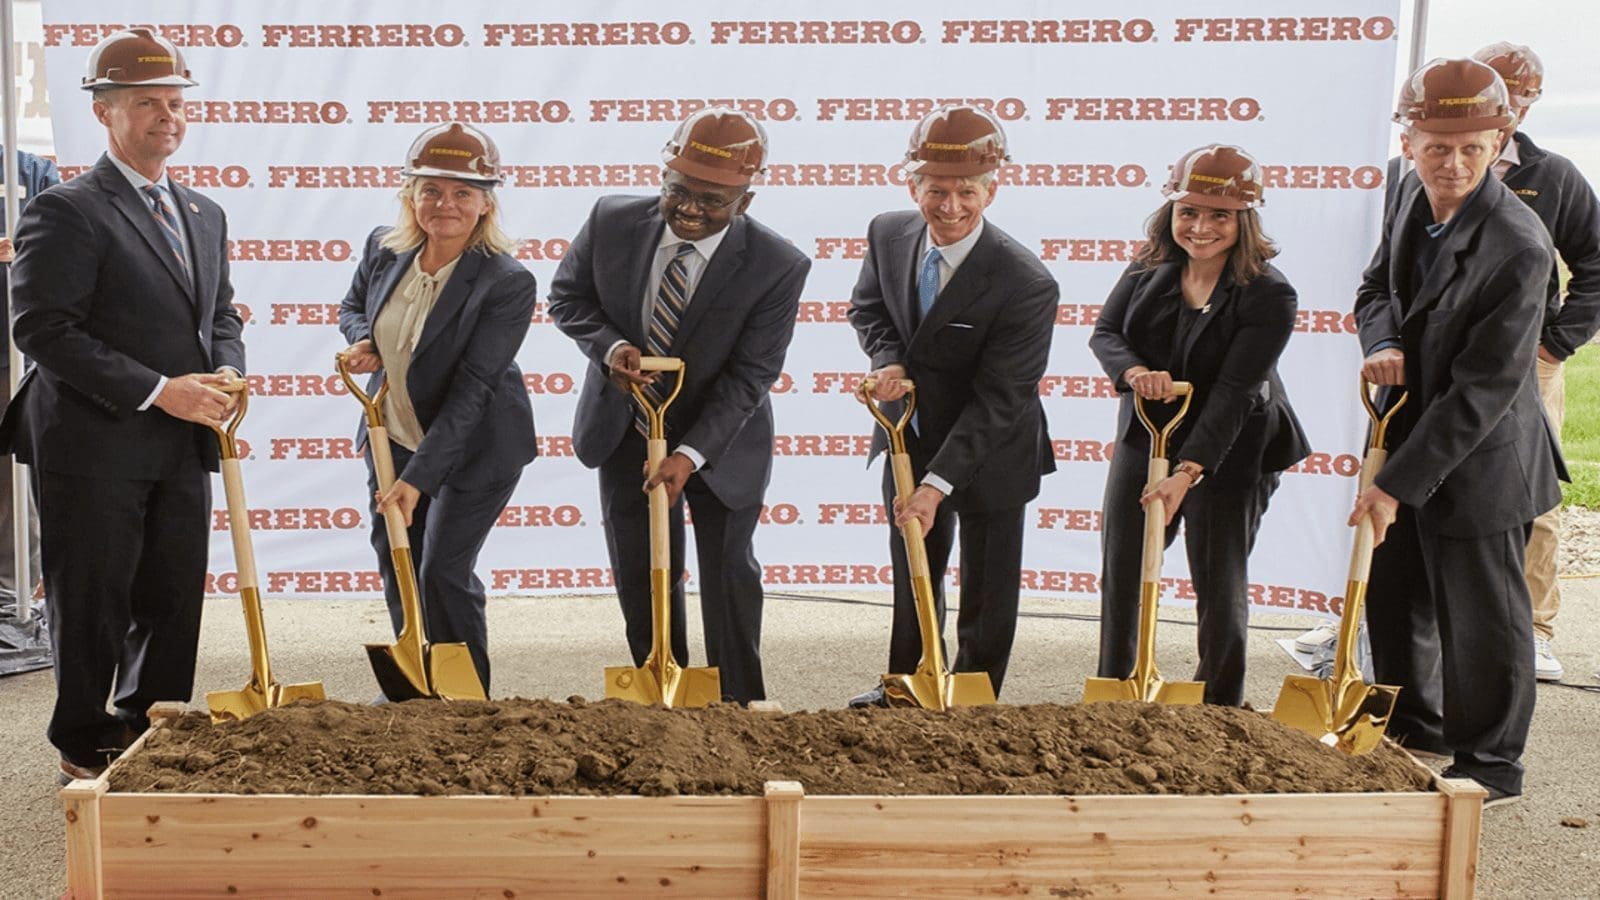 Ferrero breaks ground on project to build first chocolate processing facility in North America